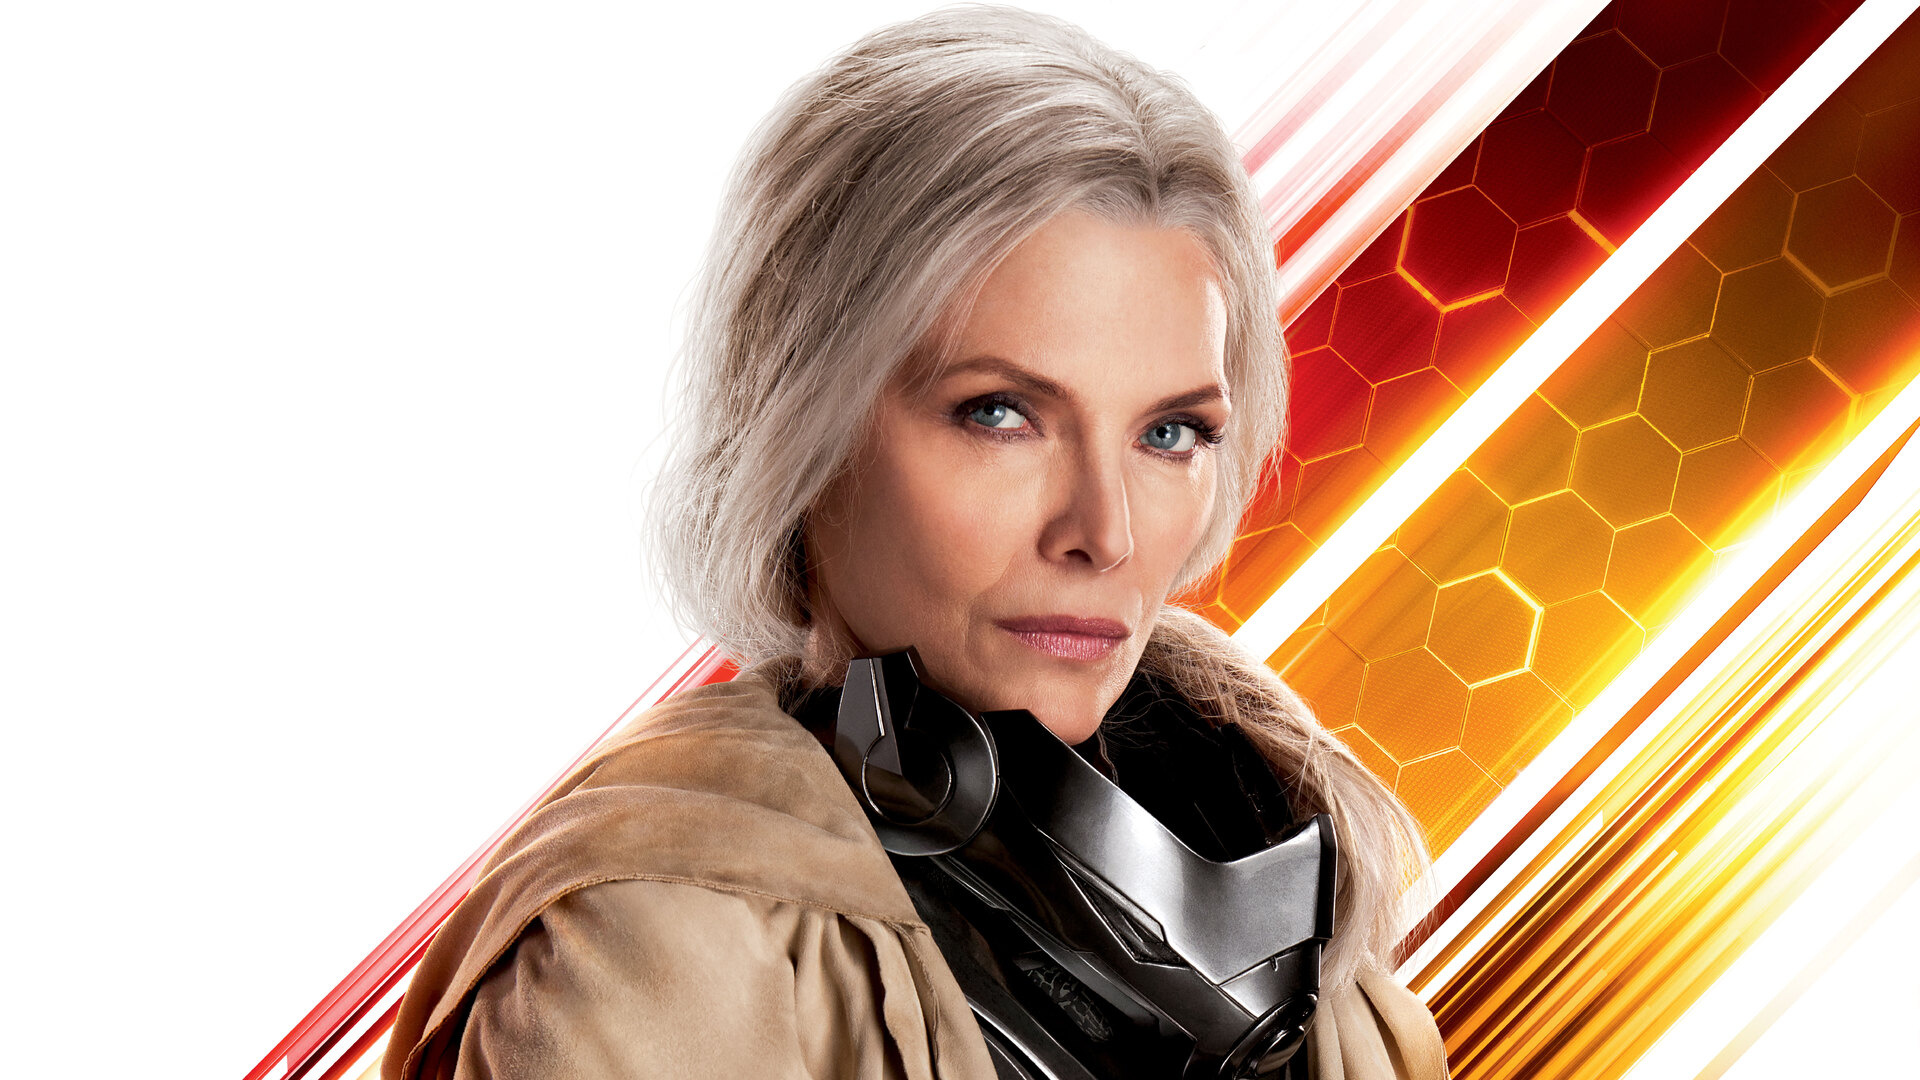 Michelle Pfeiffer, Wasp in Ant-Man, Laptop wallpapers, HD images, 1920x1080 Full HD Desktop